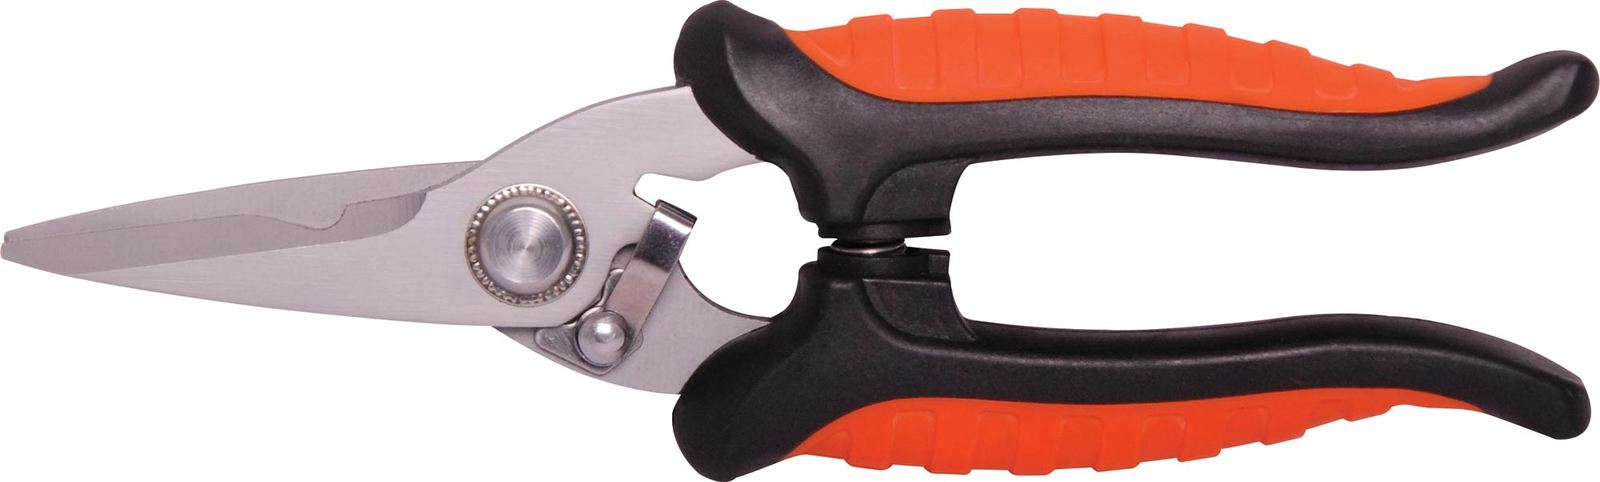 Multi-Purpose Snips with SK4 Carbon steel suit for cutting cloth Carpet Linoleum Leather Cardboard